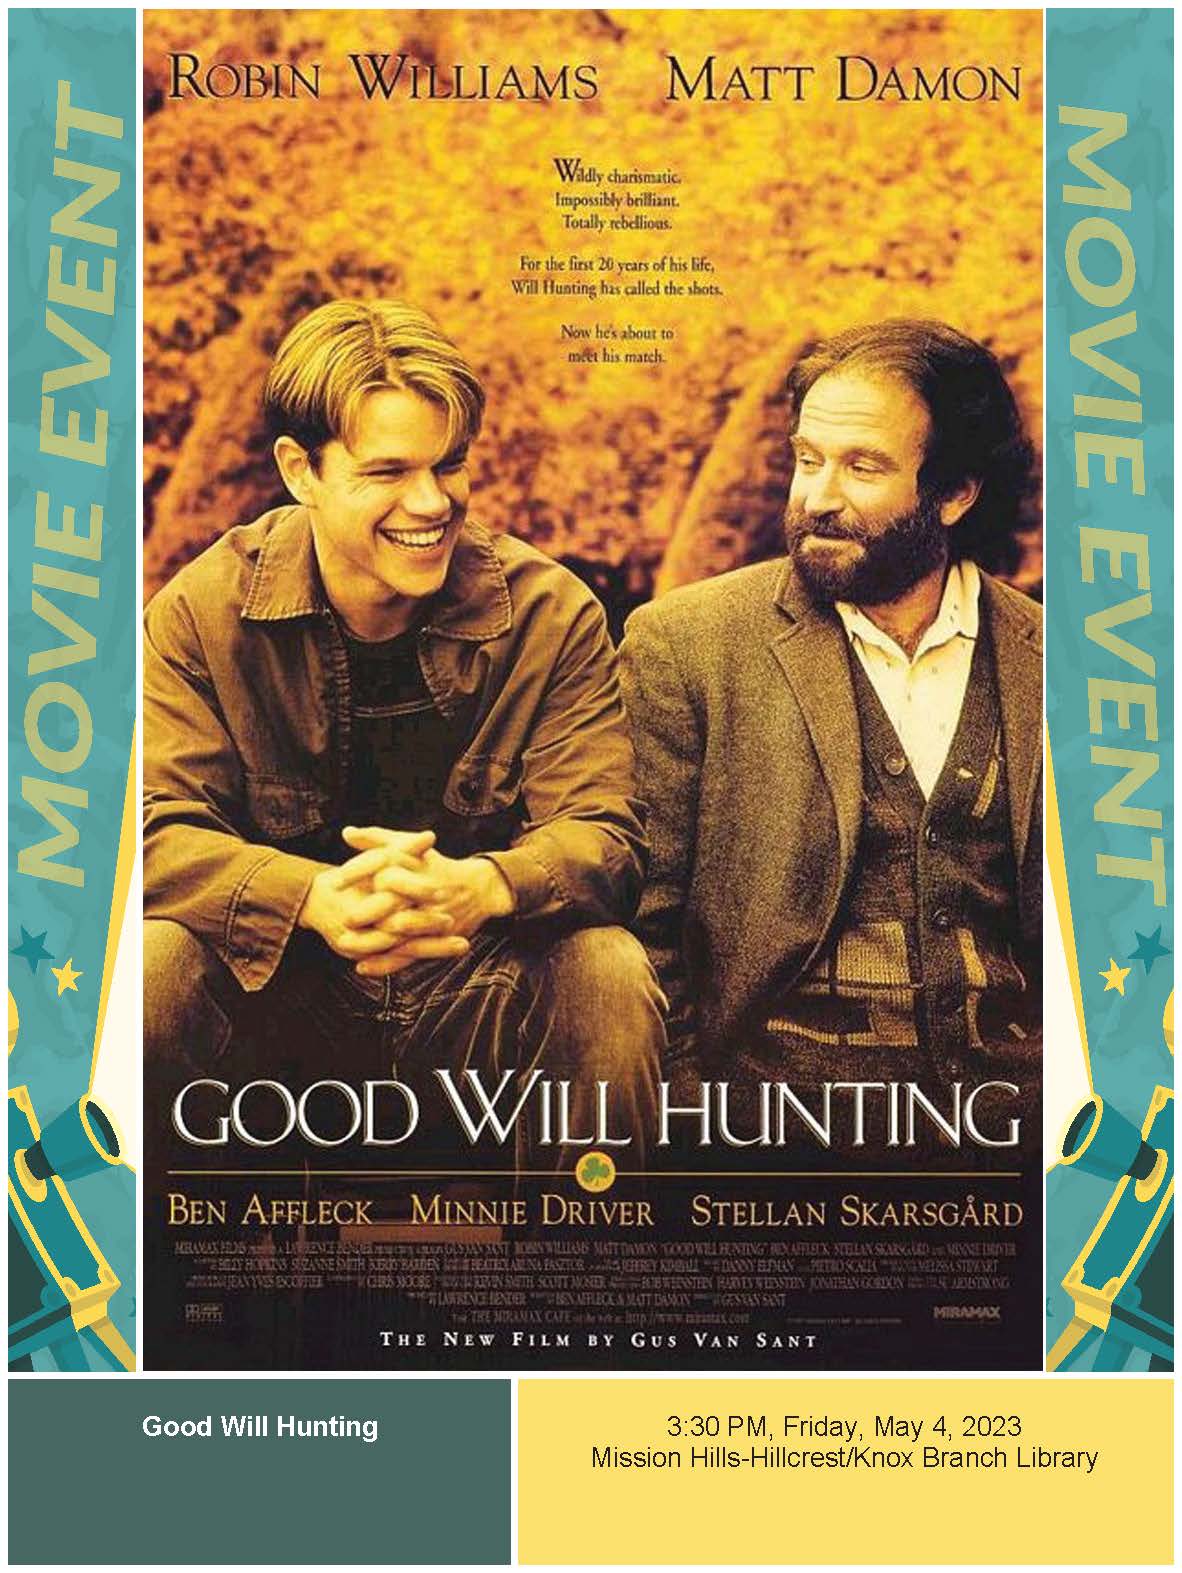 Poster for Good Will Hunting, with Matt Damon and Robin Williams sitting together